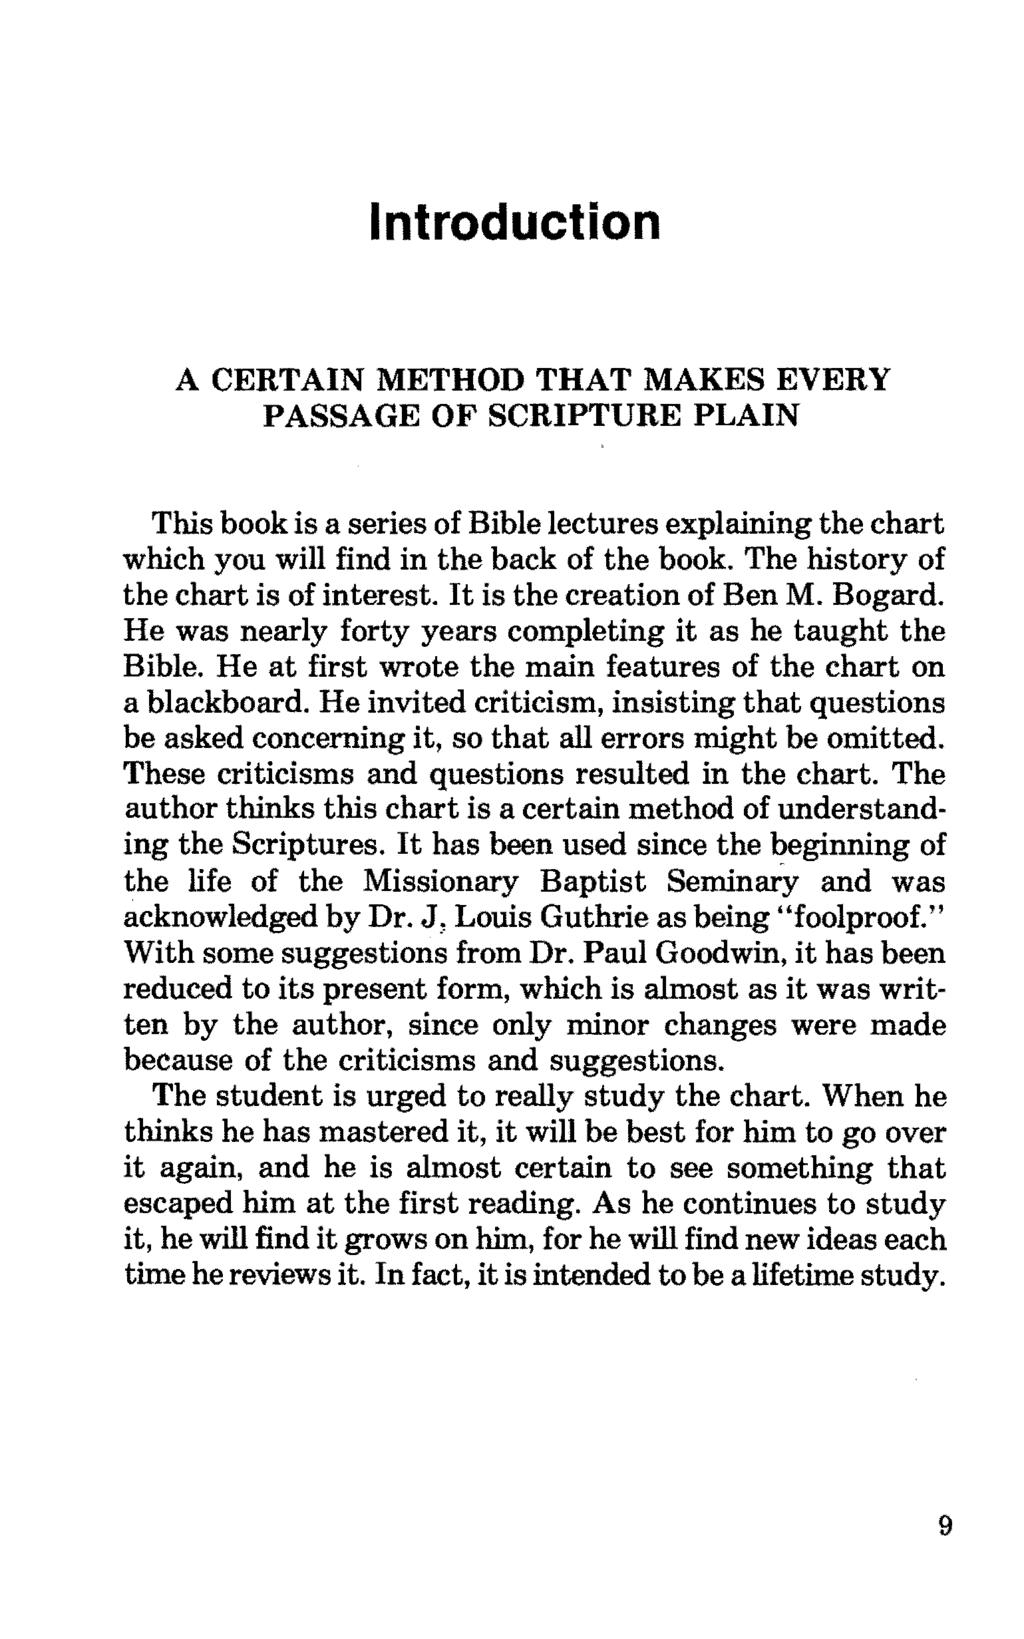 Introduction A CERTAIN METHOD THAT MAKES EVERY PASSAGE OF SCRIPTURE PLAIN This book is a series of Bible lectures explaining the chart which you will find in the back of the book.